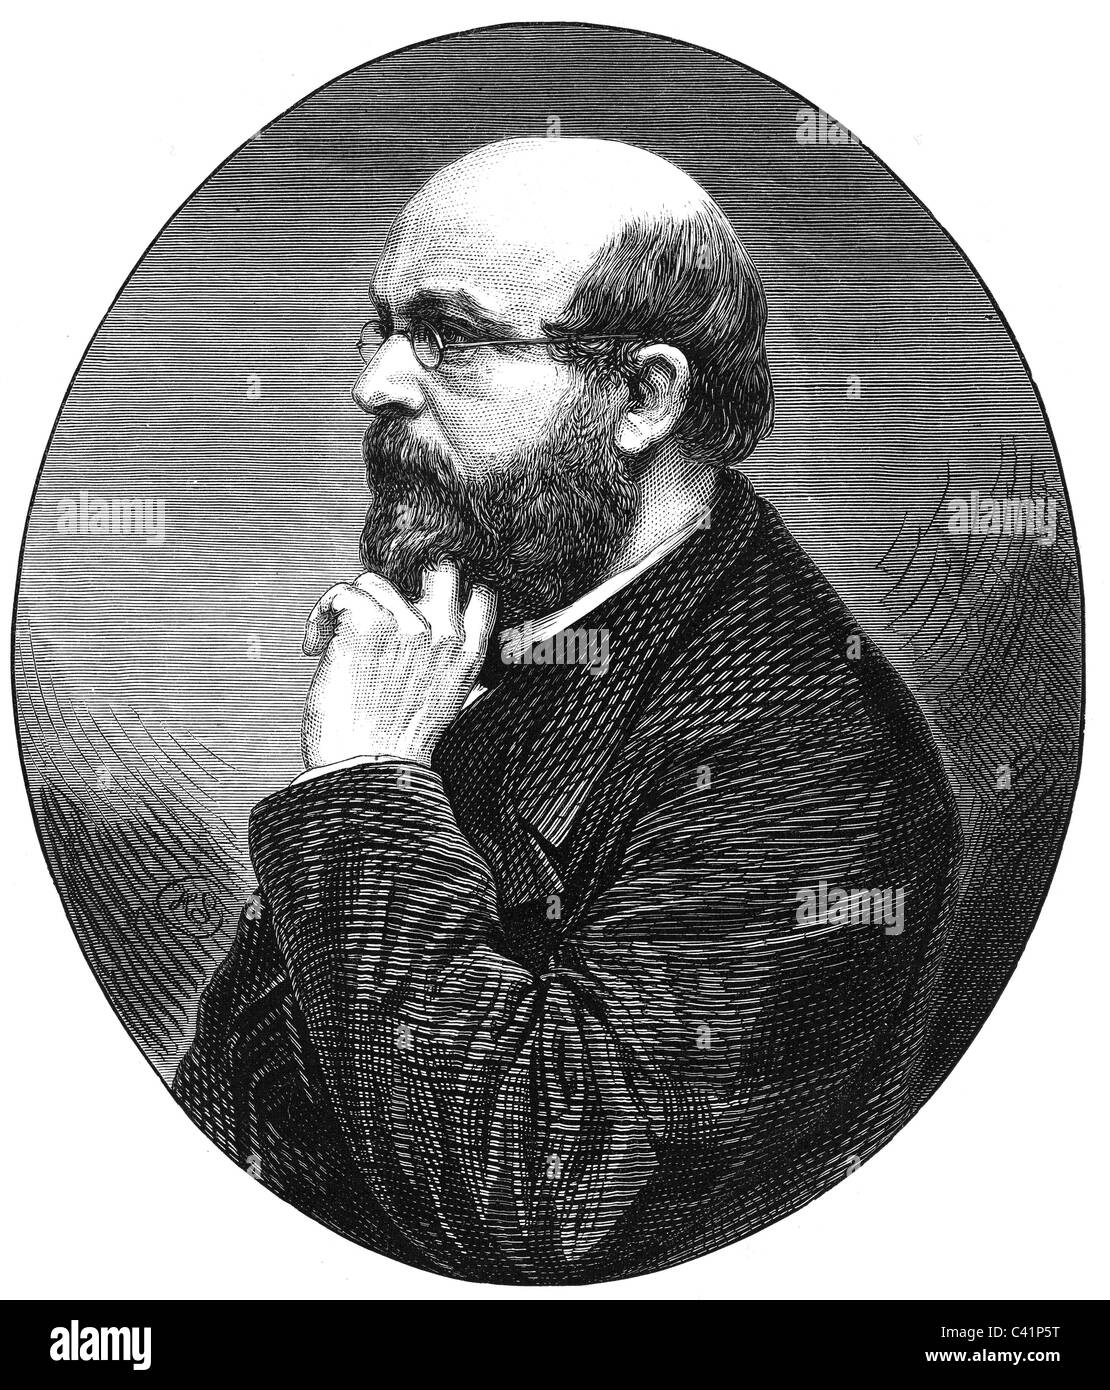 Burger, Ludwig, 19.9.1825 - 22.10.1884, German painter, portrait, wood engraving, published in 1876, Stock Photo